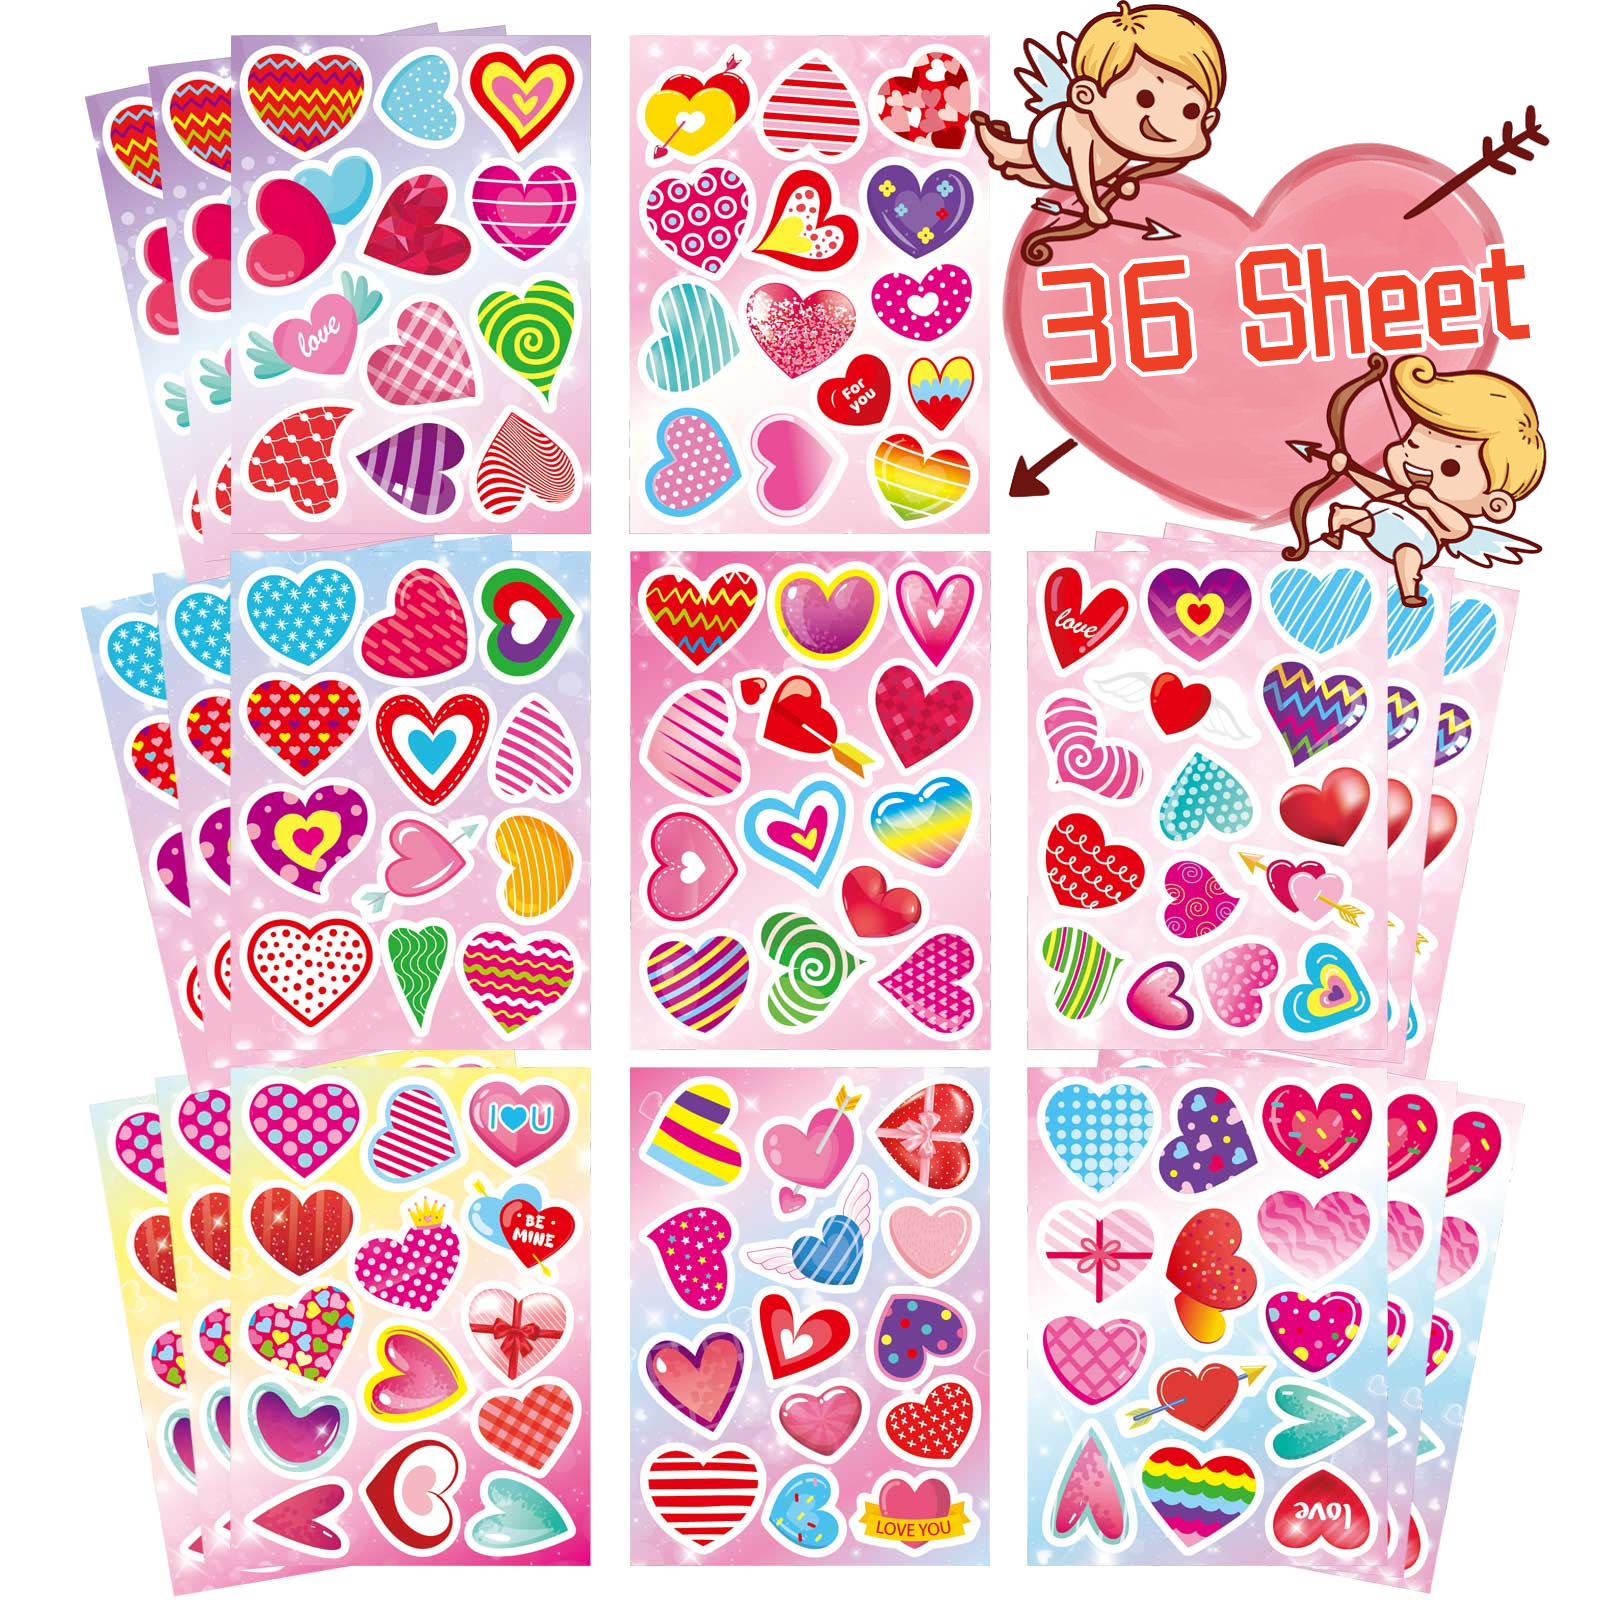 Heart Sticker Multi-Color Self-Adhesive Heart-Shaped Stickers Valentine's Day Heart Stickers for Valentine's Day or Wedding Decorations 500 Pieces 1